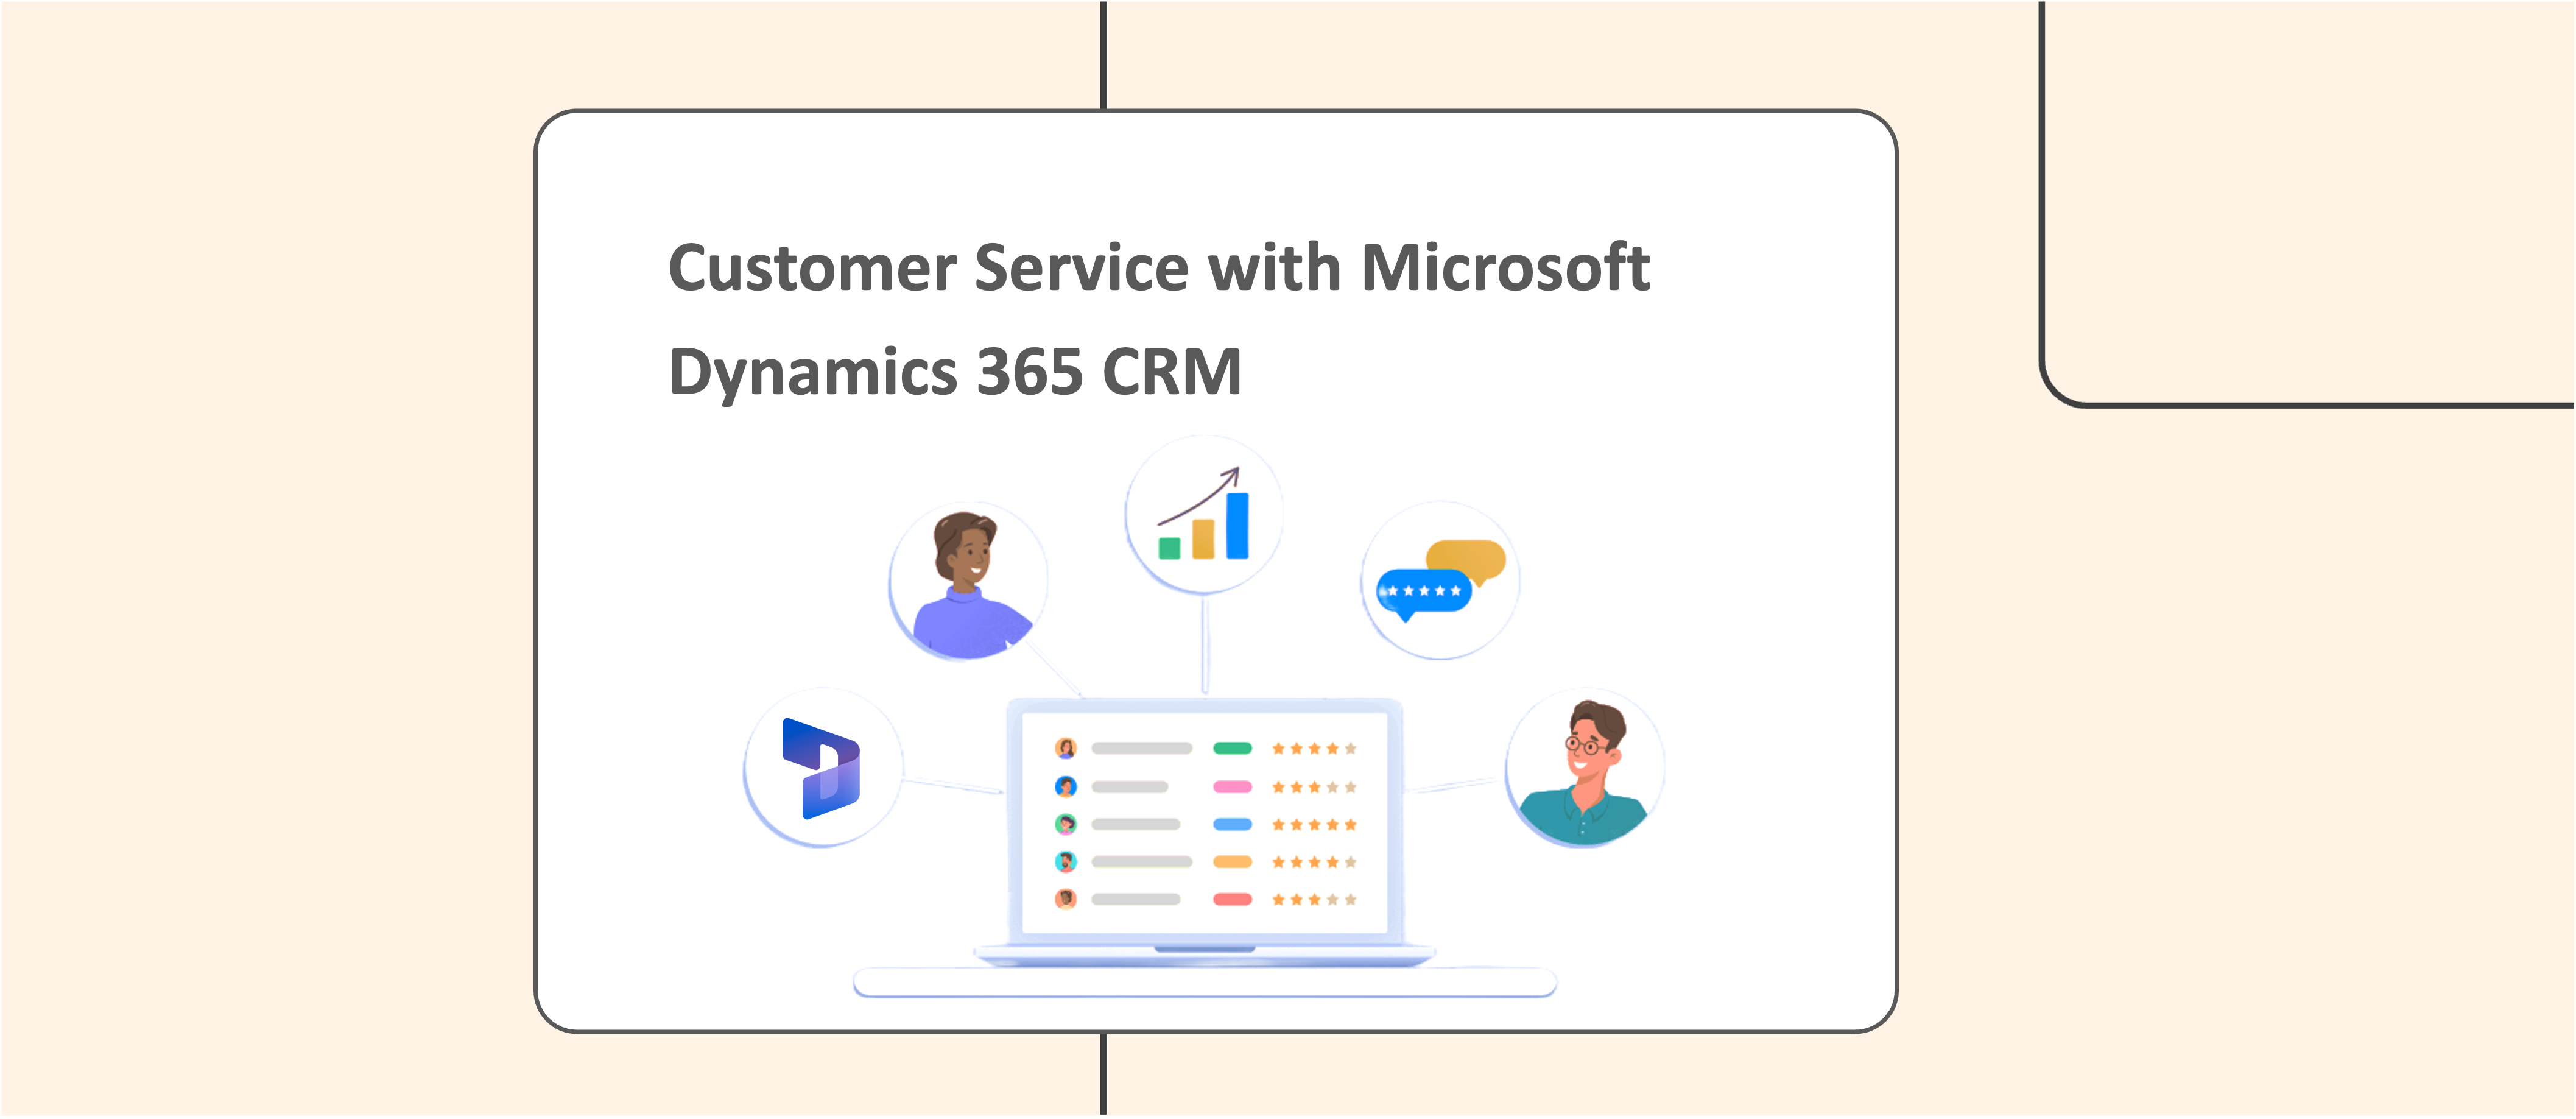 How to Improve Customer Service with Dynamics 365 CRM